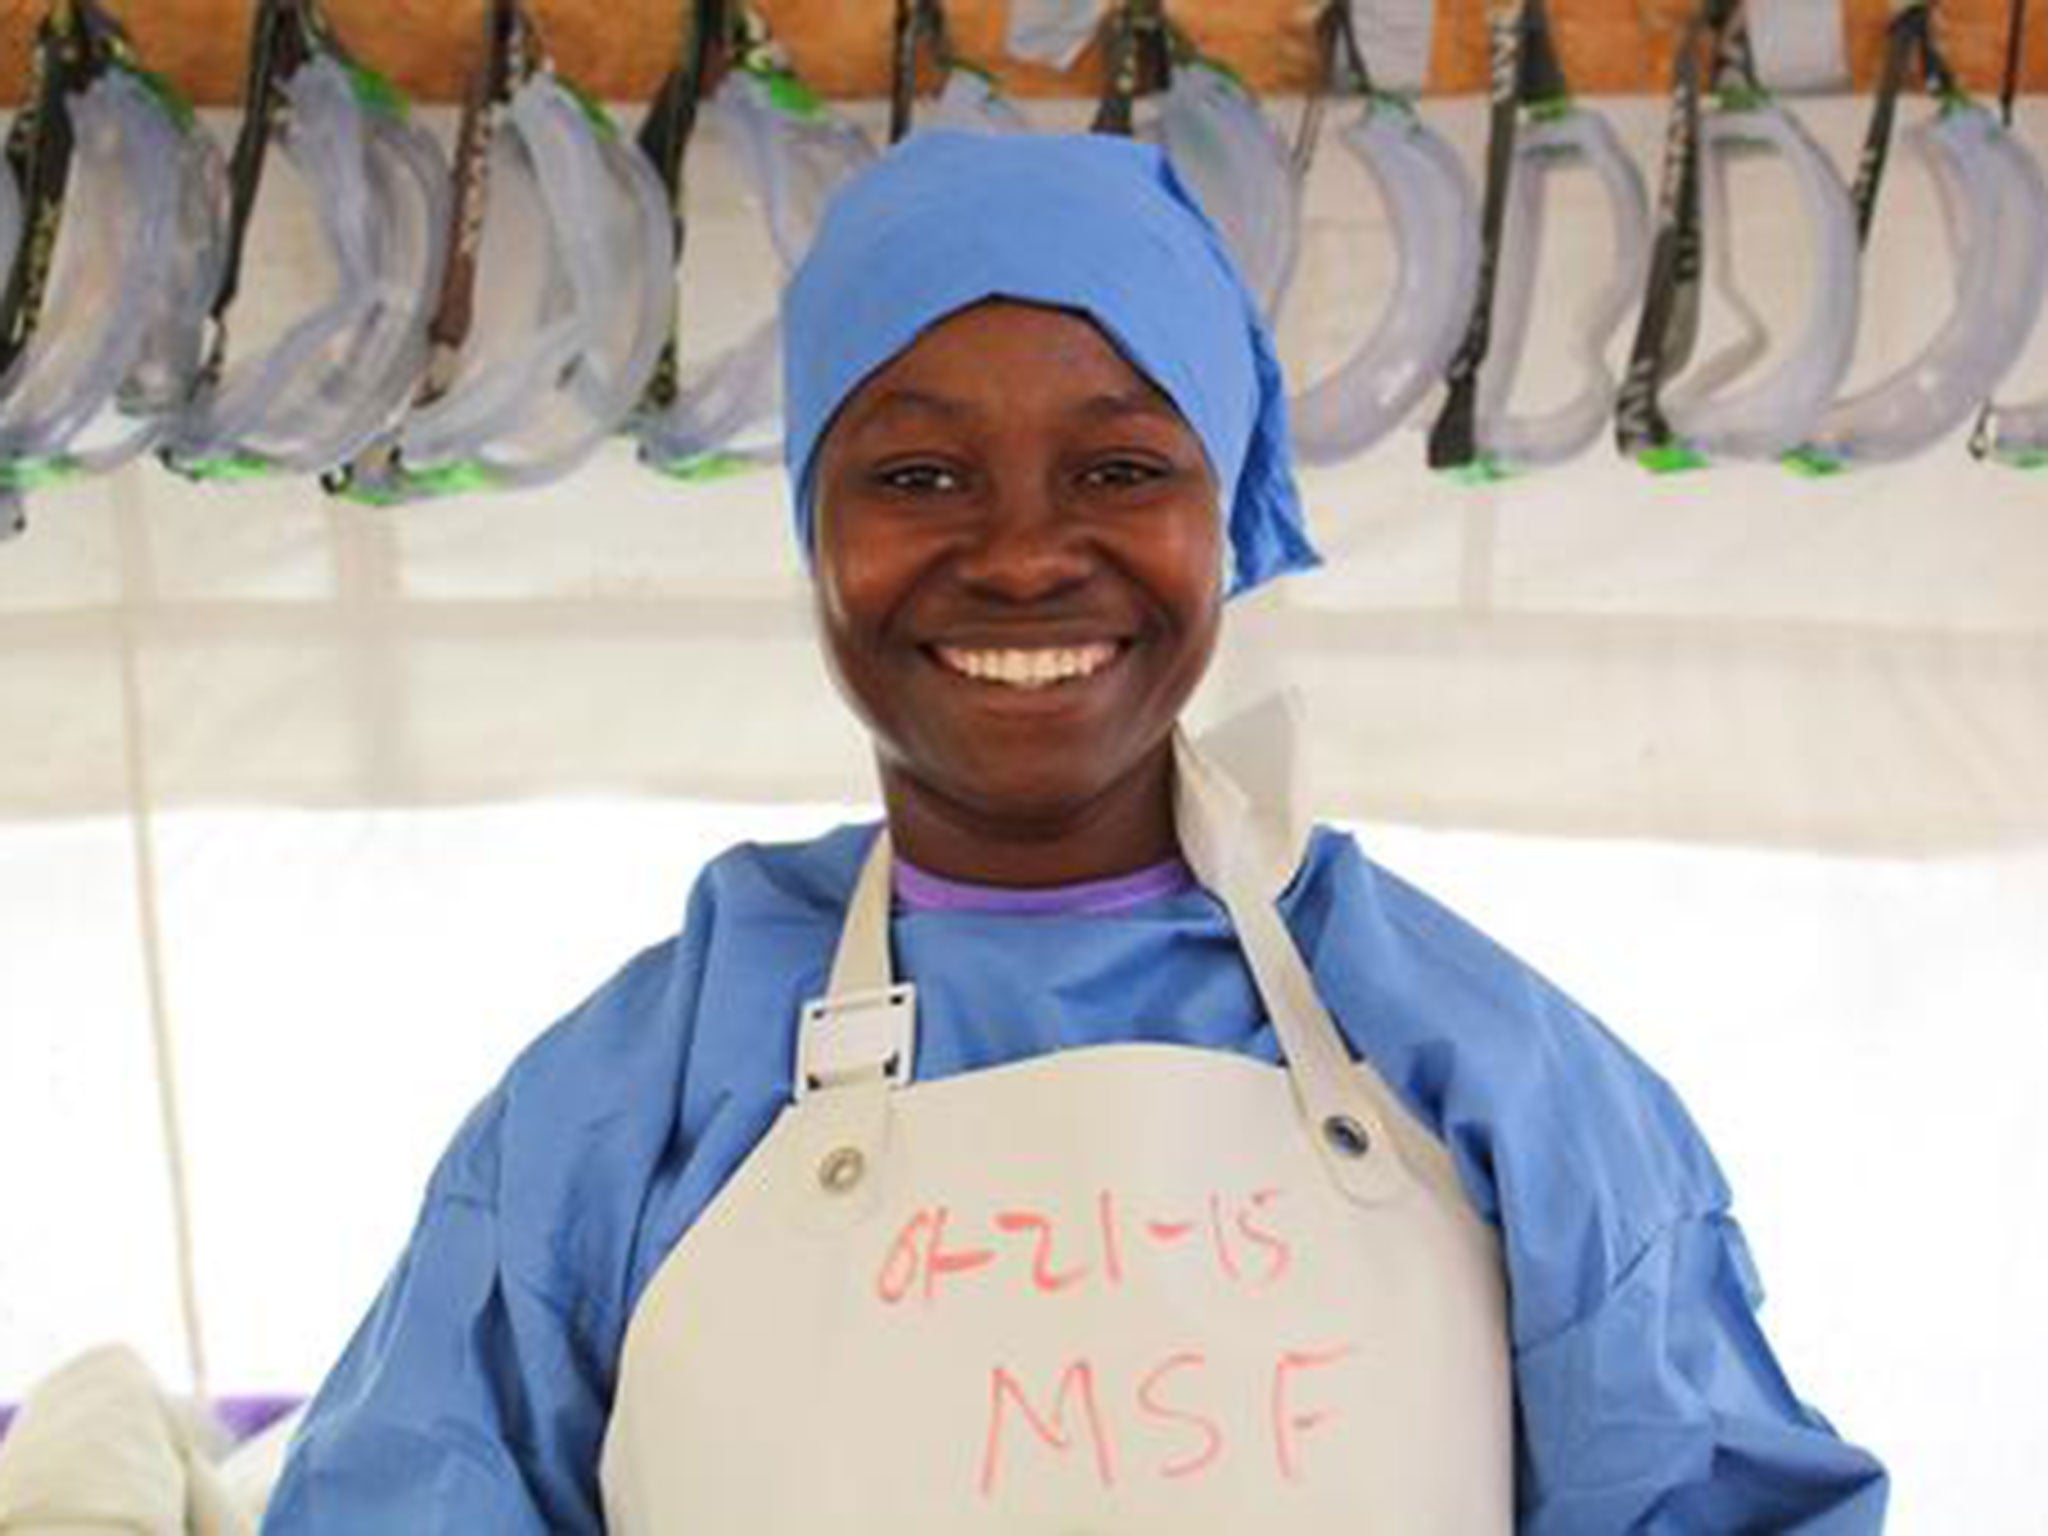 Siannie Beyan contracted Ebola and survived after care at the Medecins Sans Frontieres Ebola Management Center in Monrovia where she now works as a psychosocial assistant.